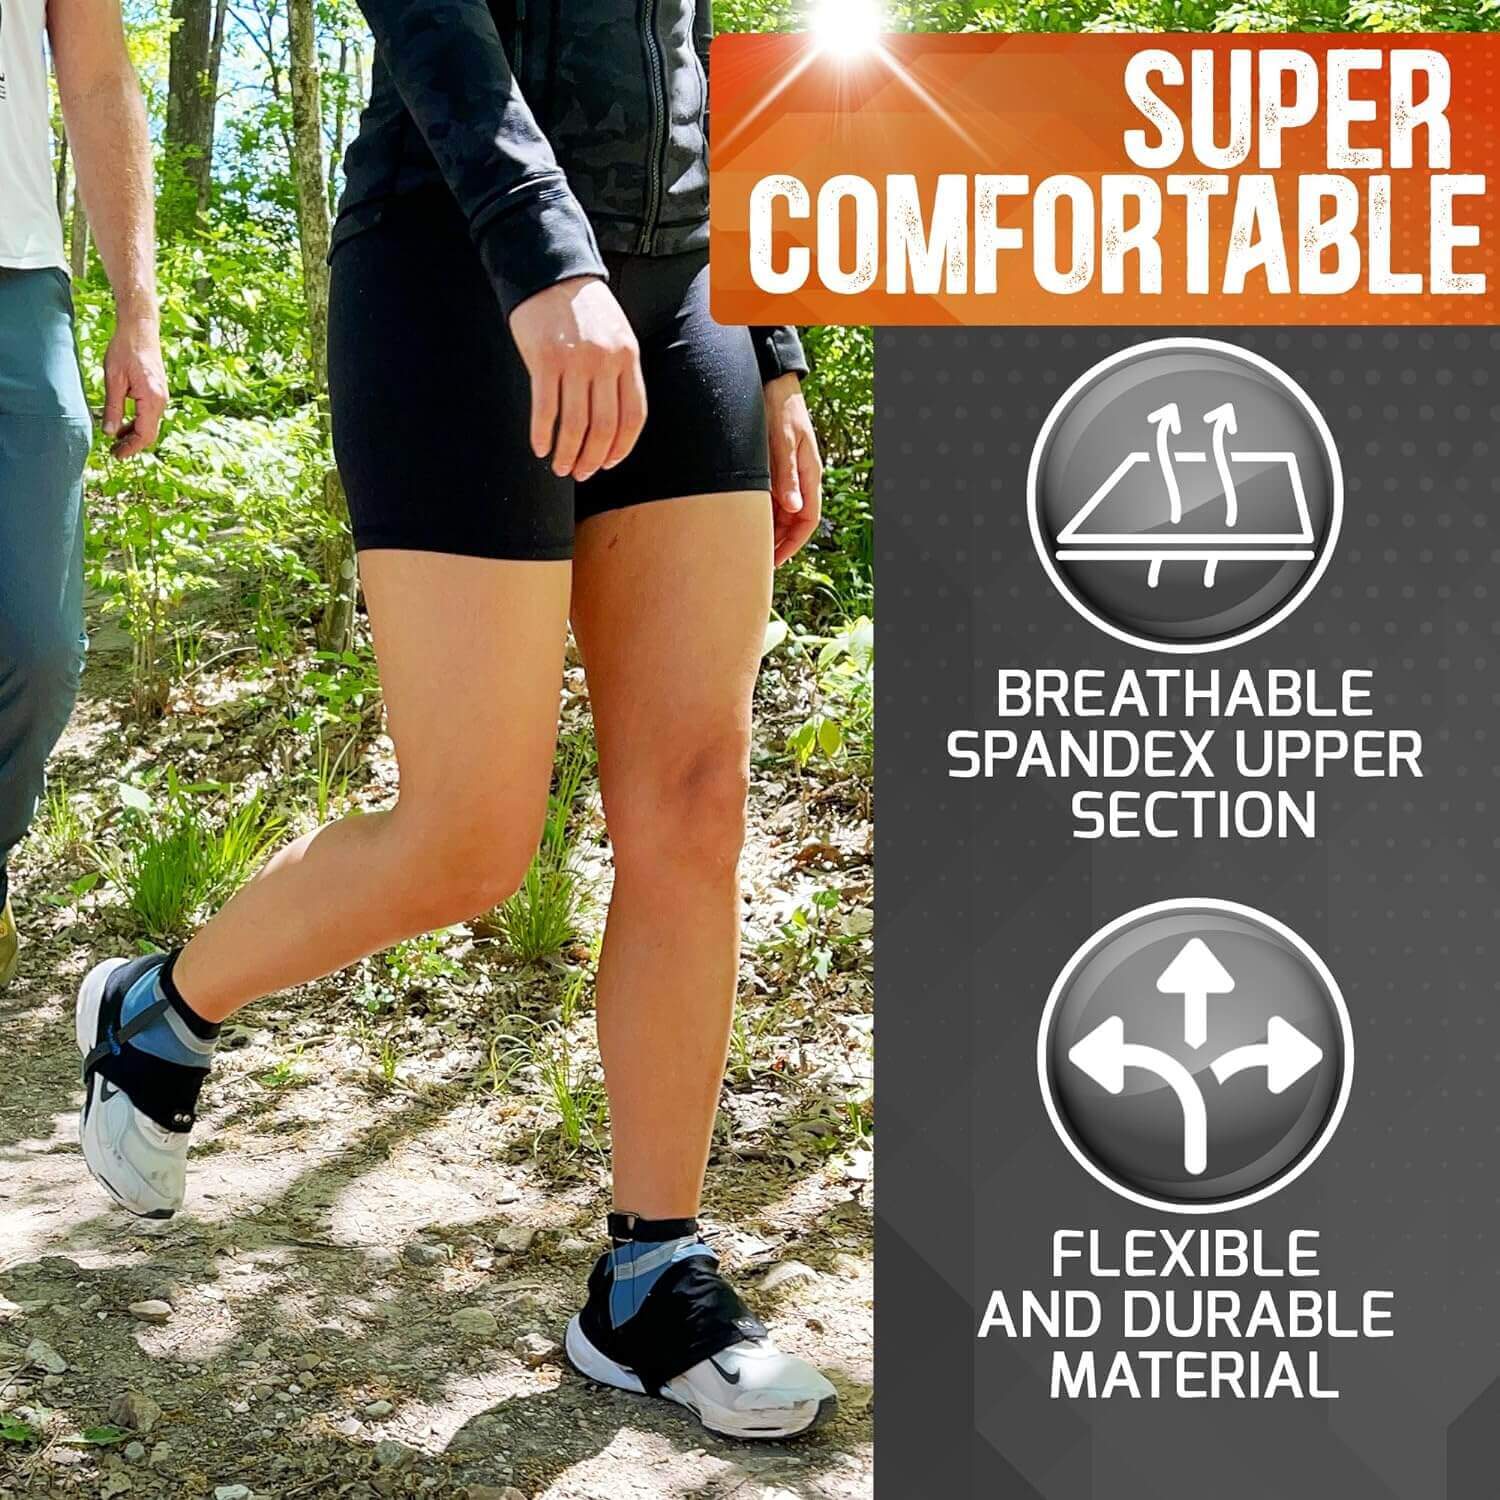 Shop The Latest >Ankle Gaiters for Running - Low Cut Shoe Protectors > *Only $33.74*> From The Top Brand > *Pike Traill* > Shop Now and Get Free Shipping On Orders Over $45.00 >*Shop Earth Foot*